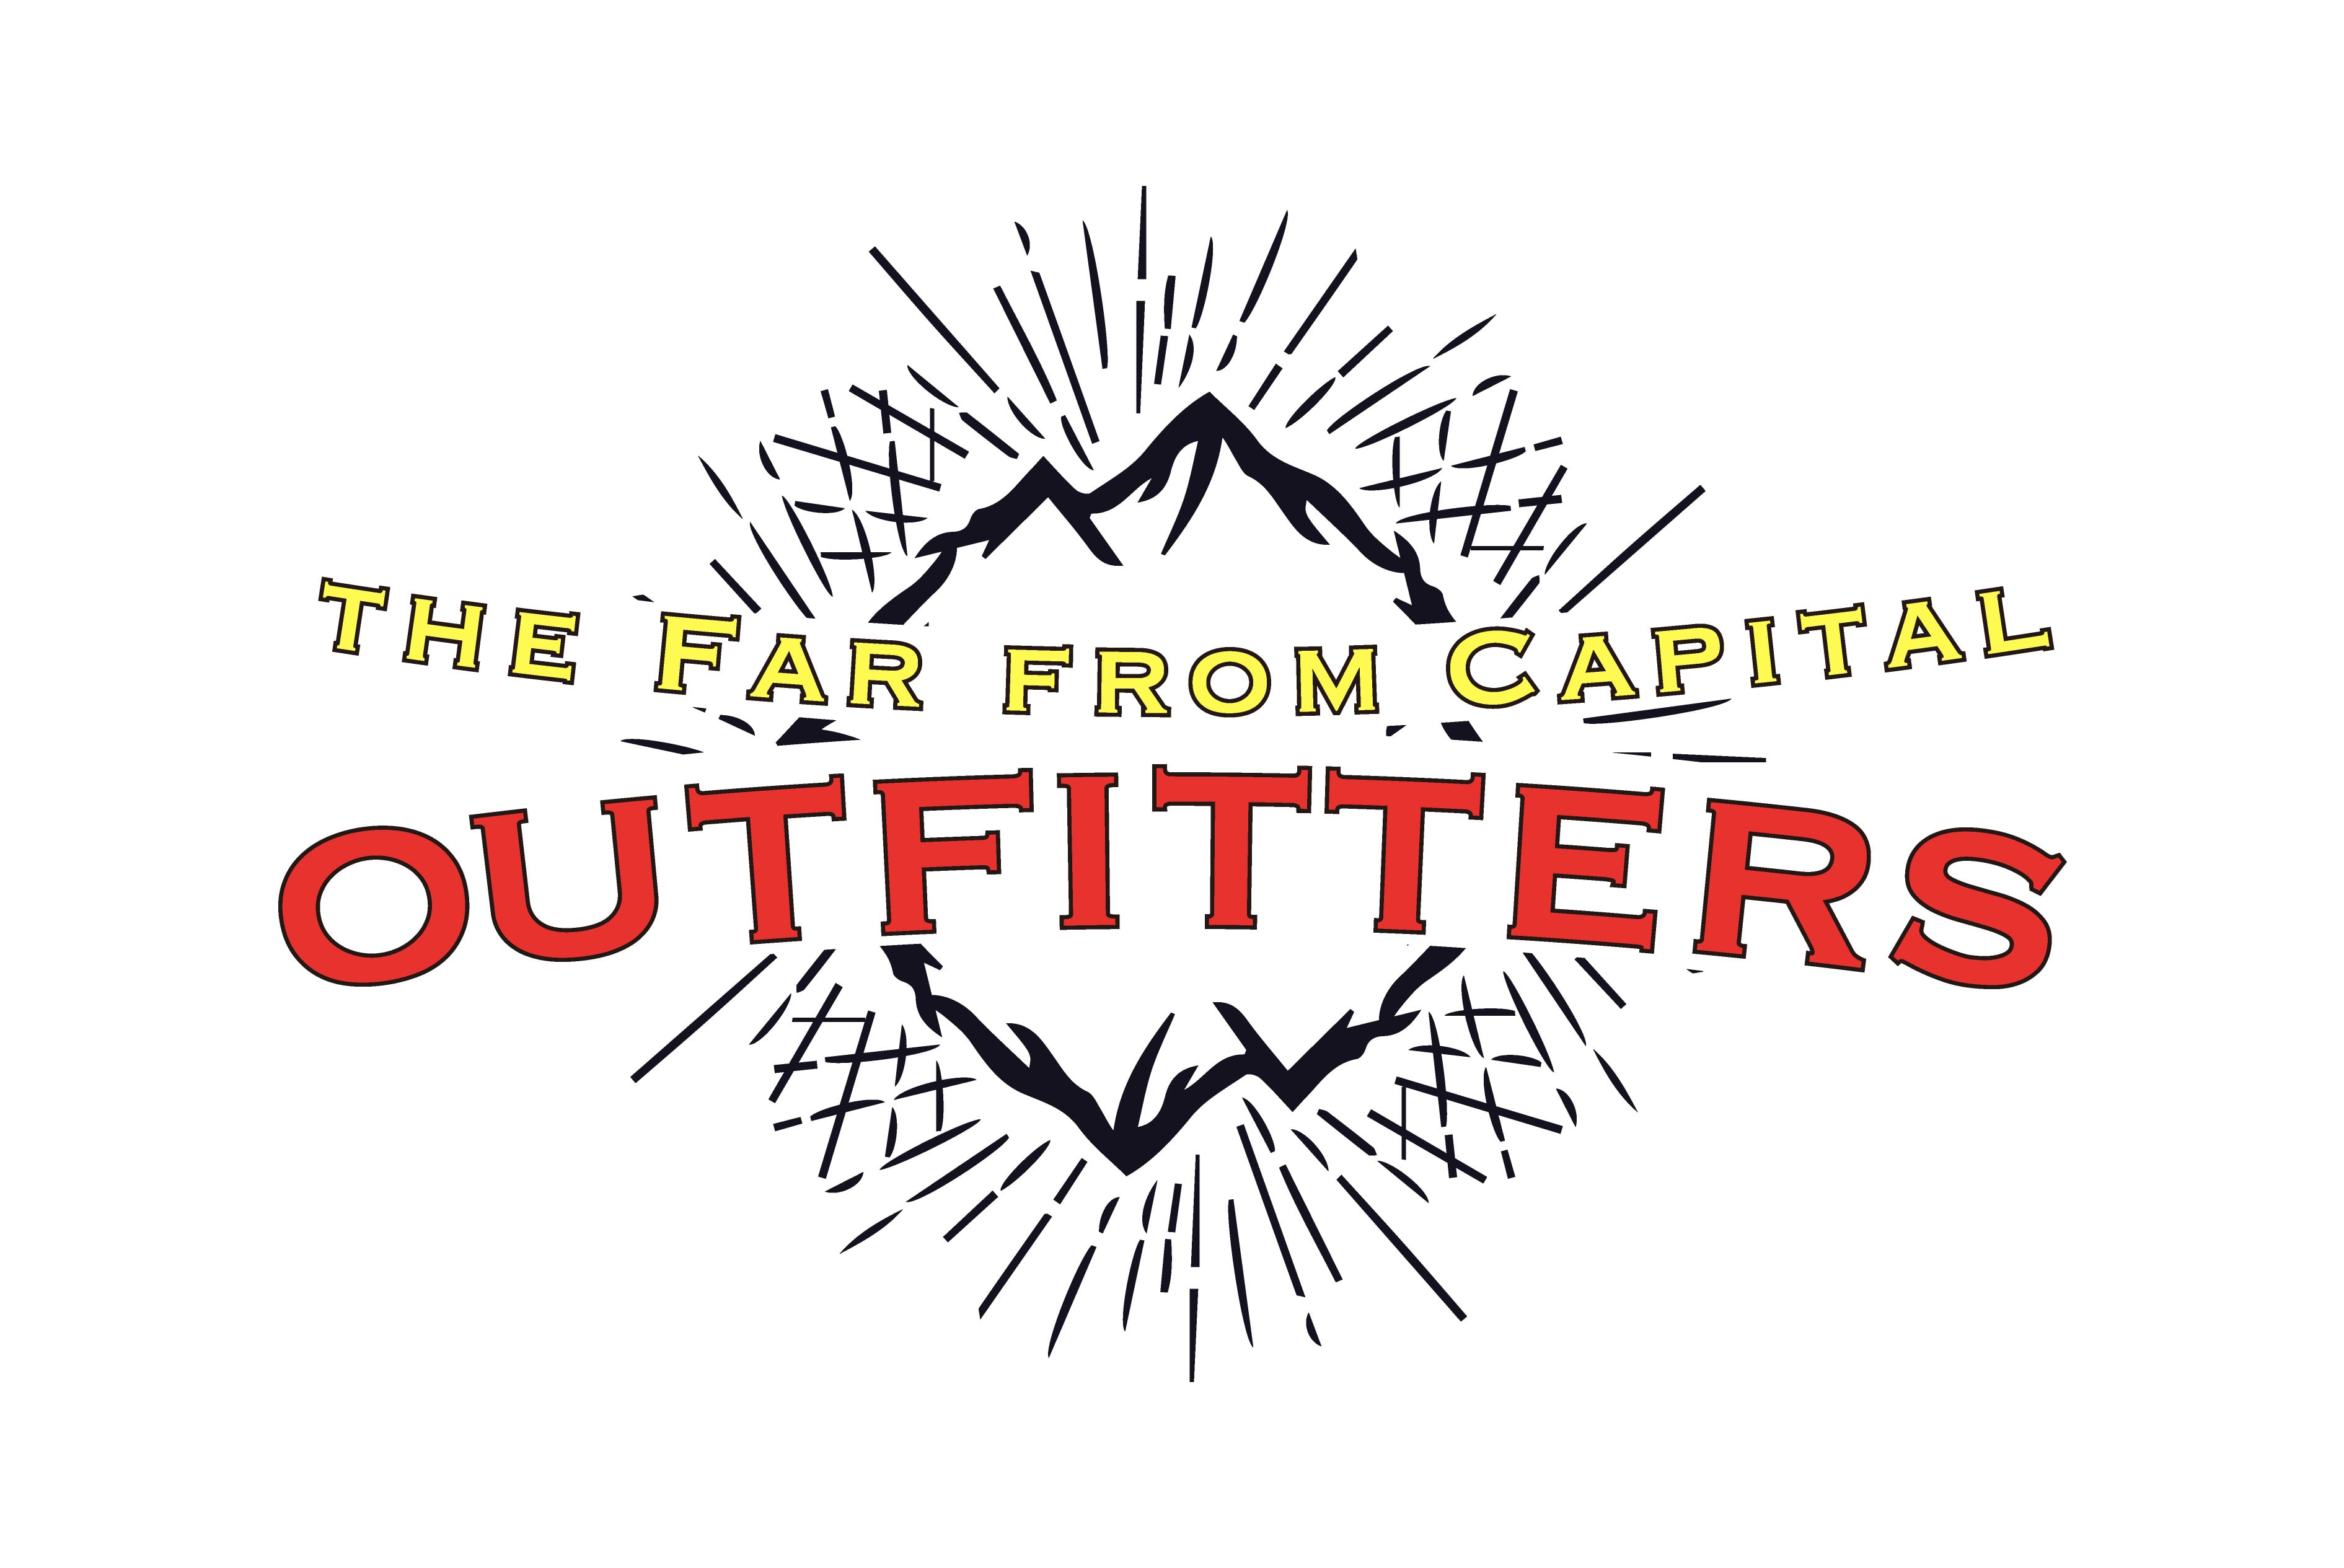 The far from capital outfitters